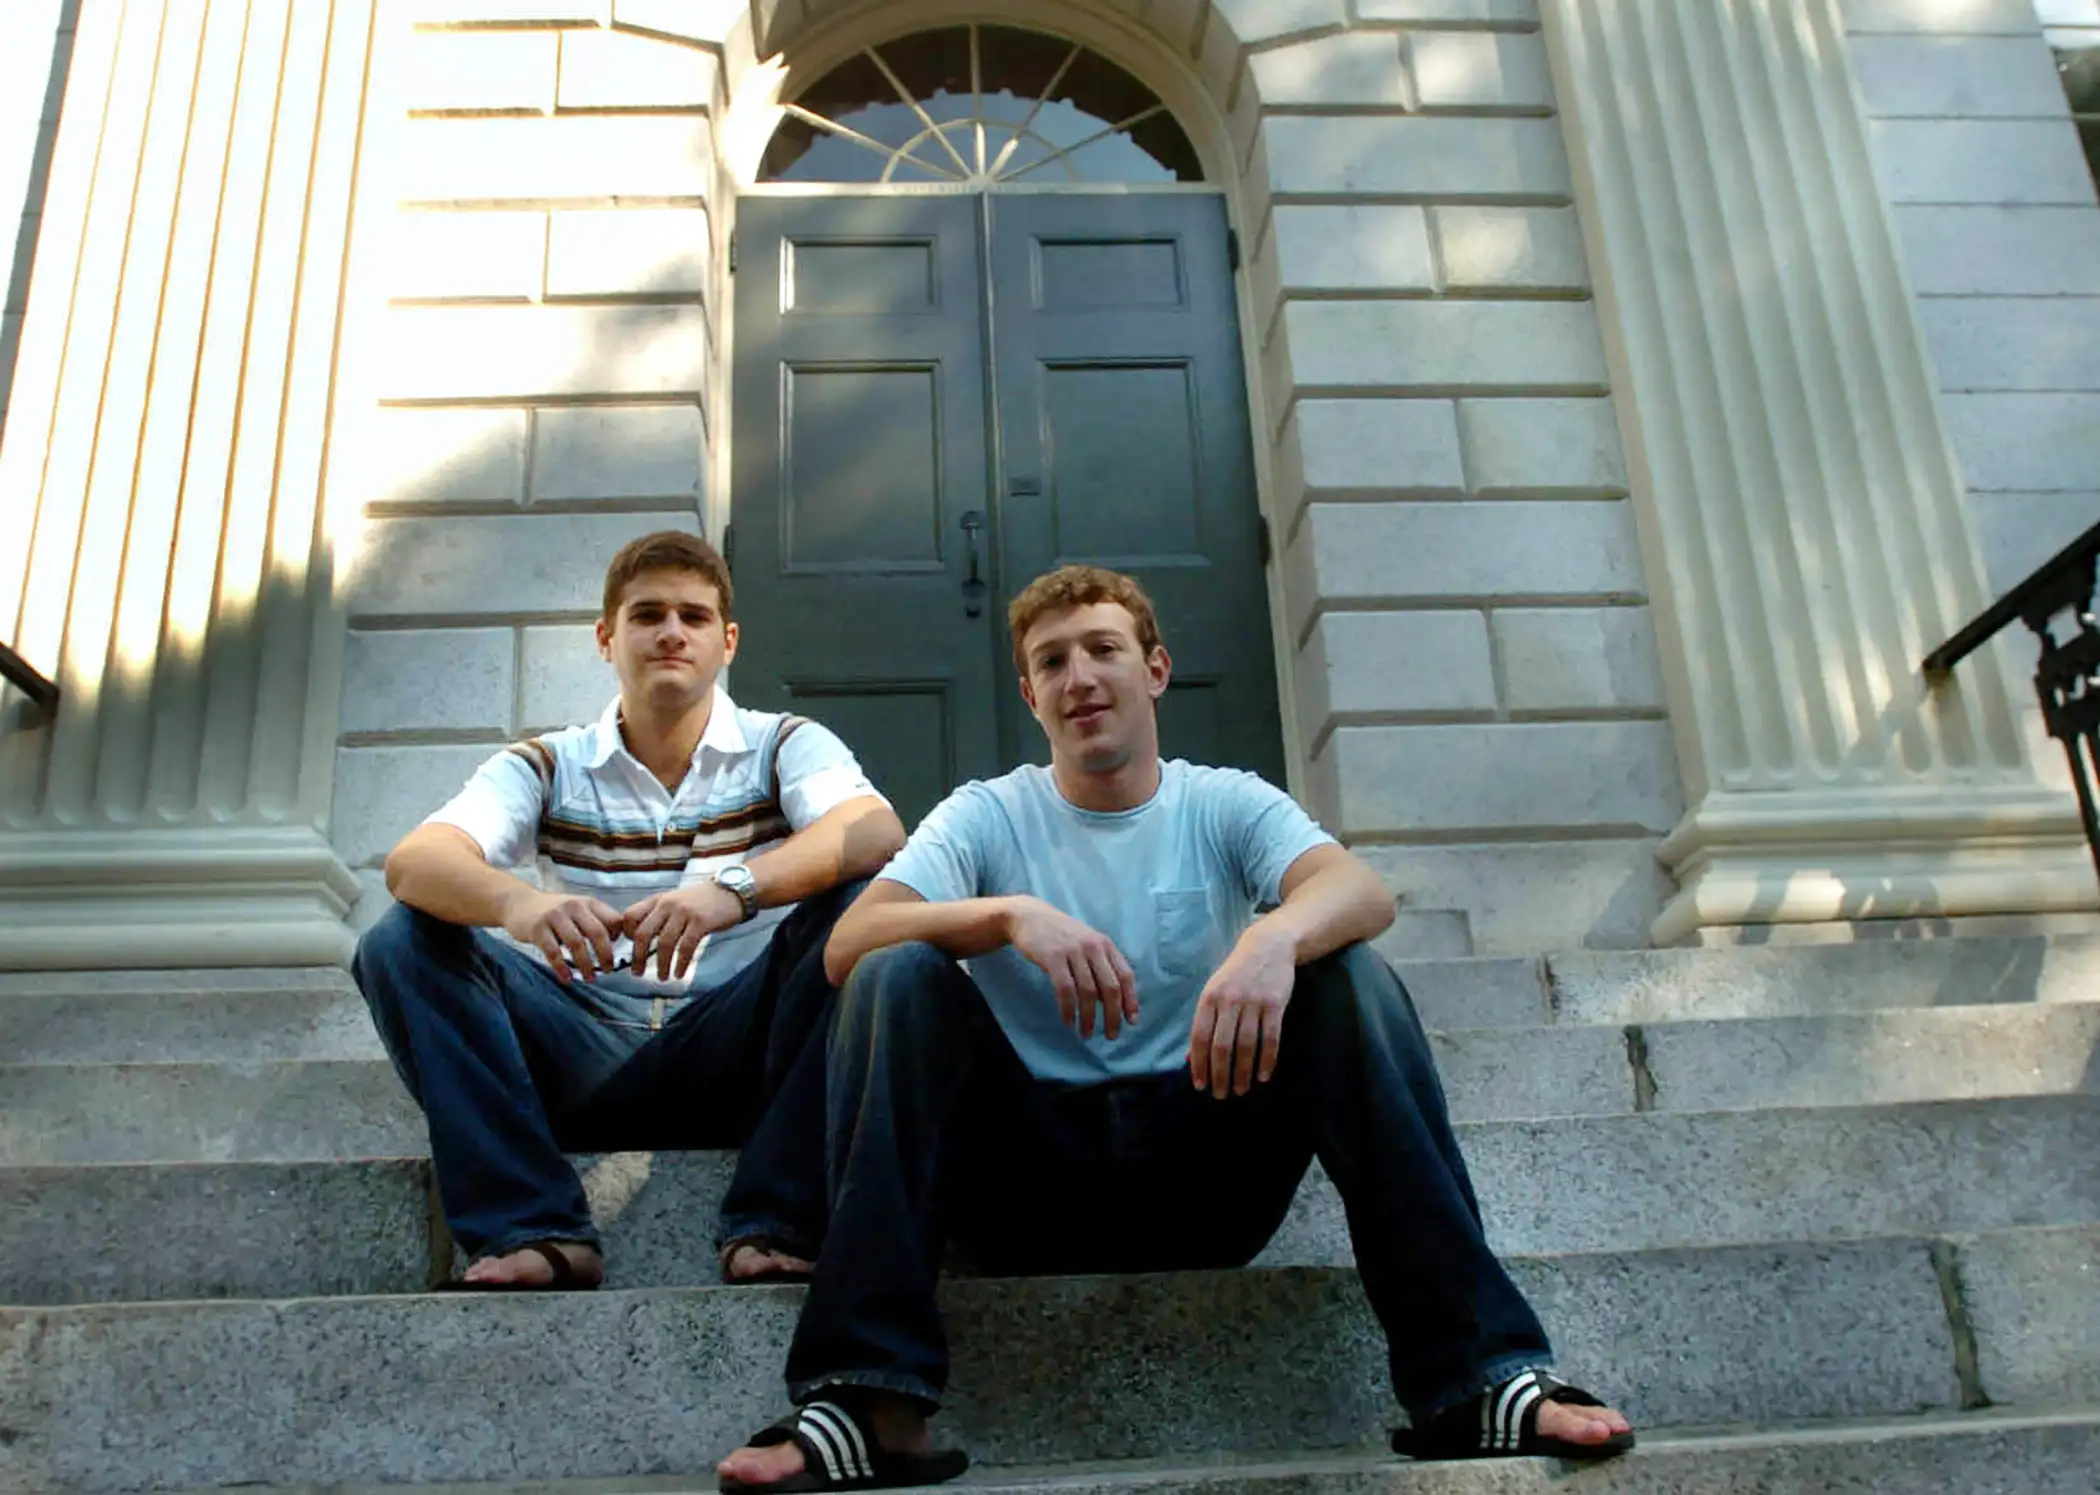 Facebook co-founders Mark Zuckerberg, right, and Dustin Moscovitz, left; at Harvard University in 2004, when they were roommates who'd just launched thefacebook.com